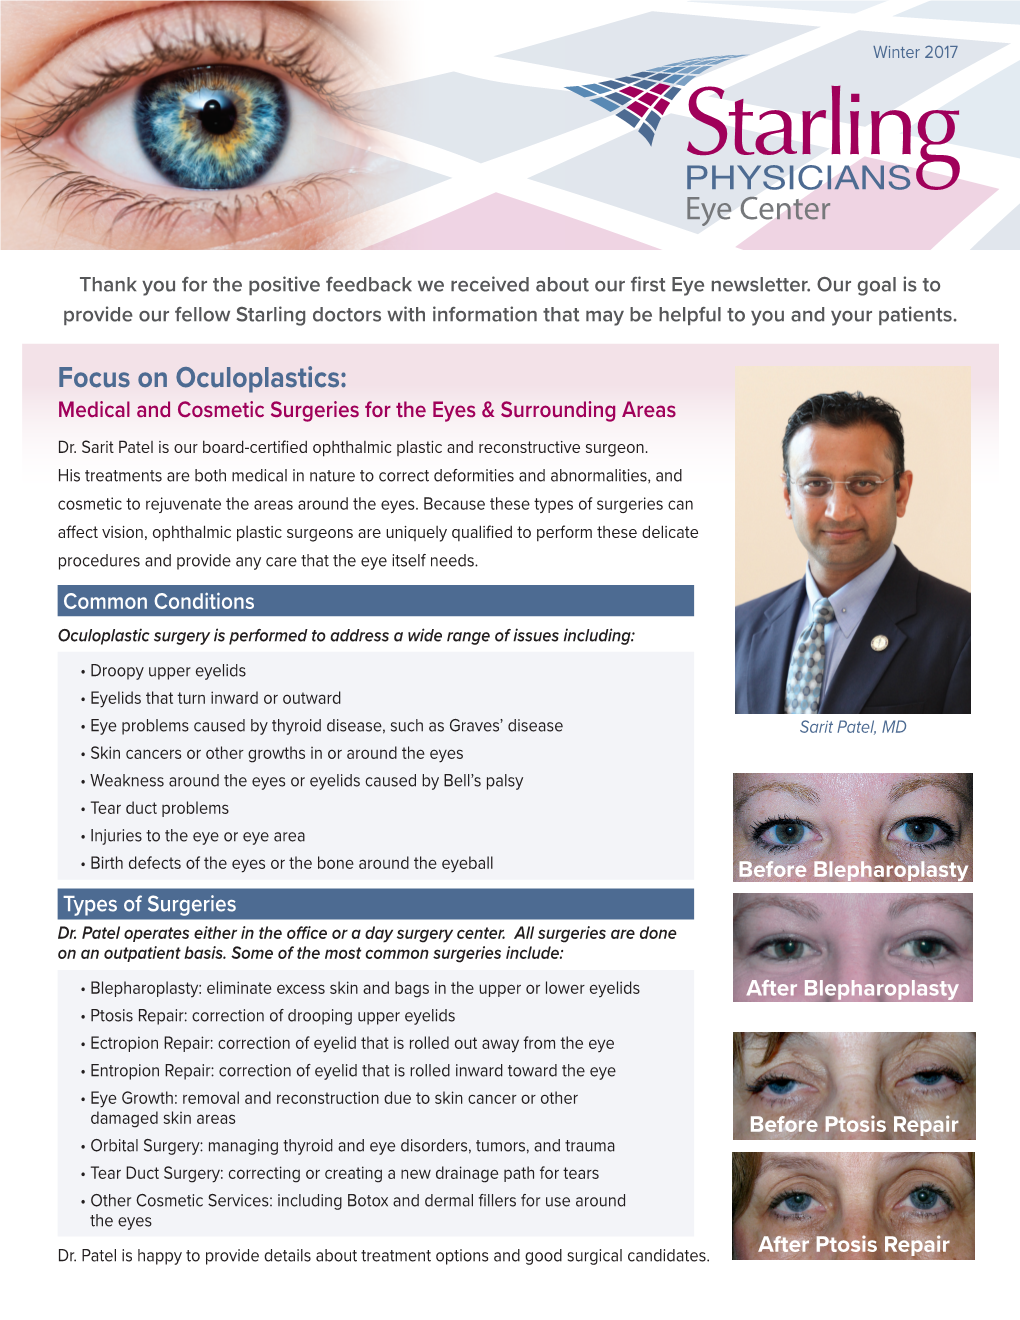 Focus on Oculoplastics: Medical and Cosmetic Surgeries for the Eyes & Surrounding Areas Dr